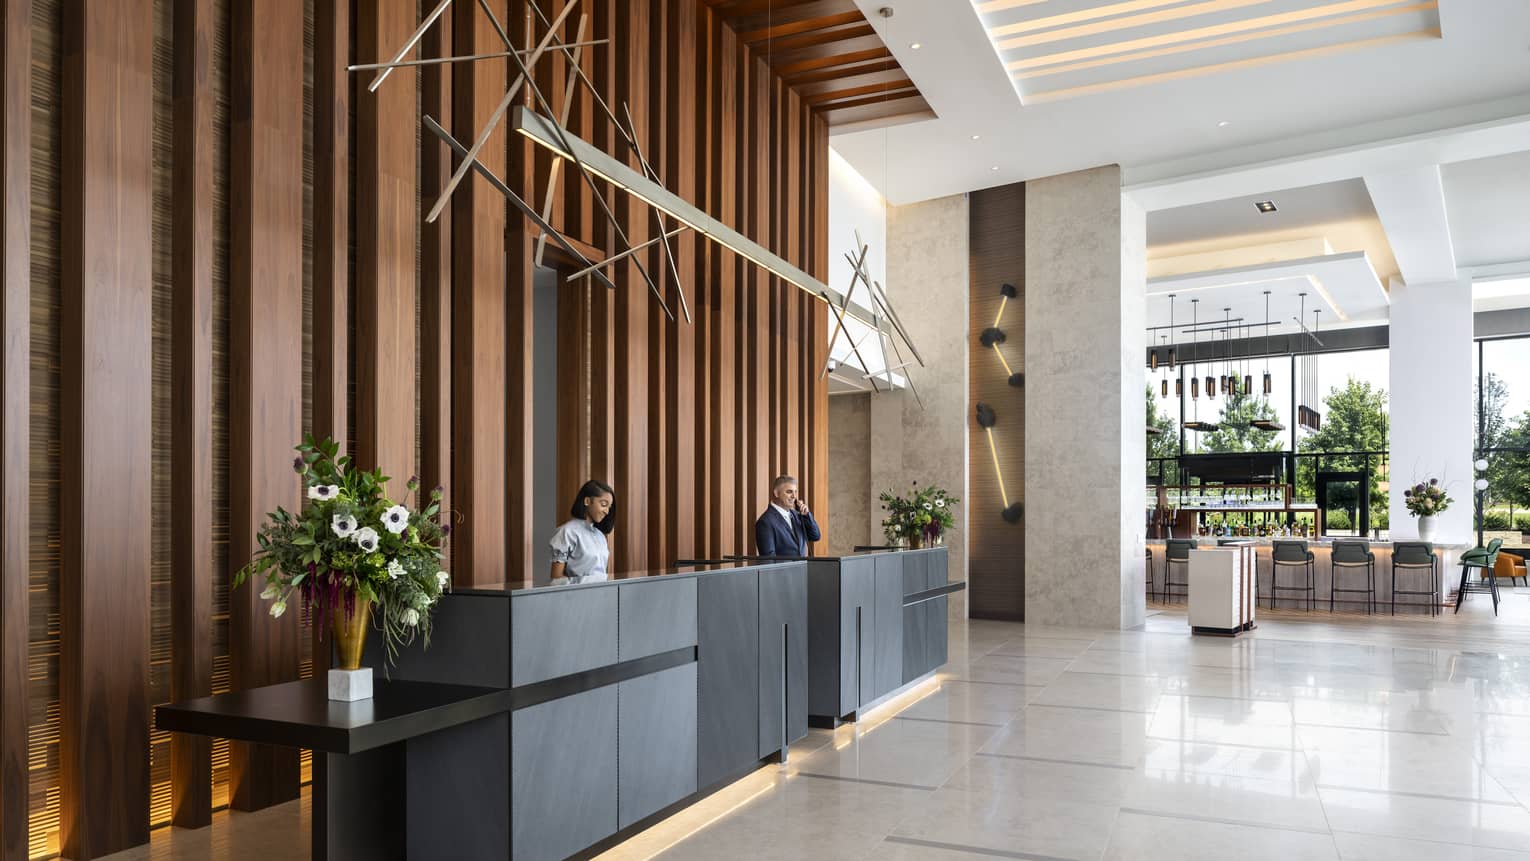 Hotel lobby with two front desks